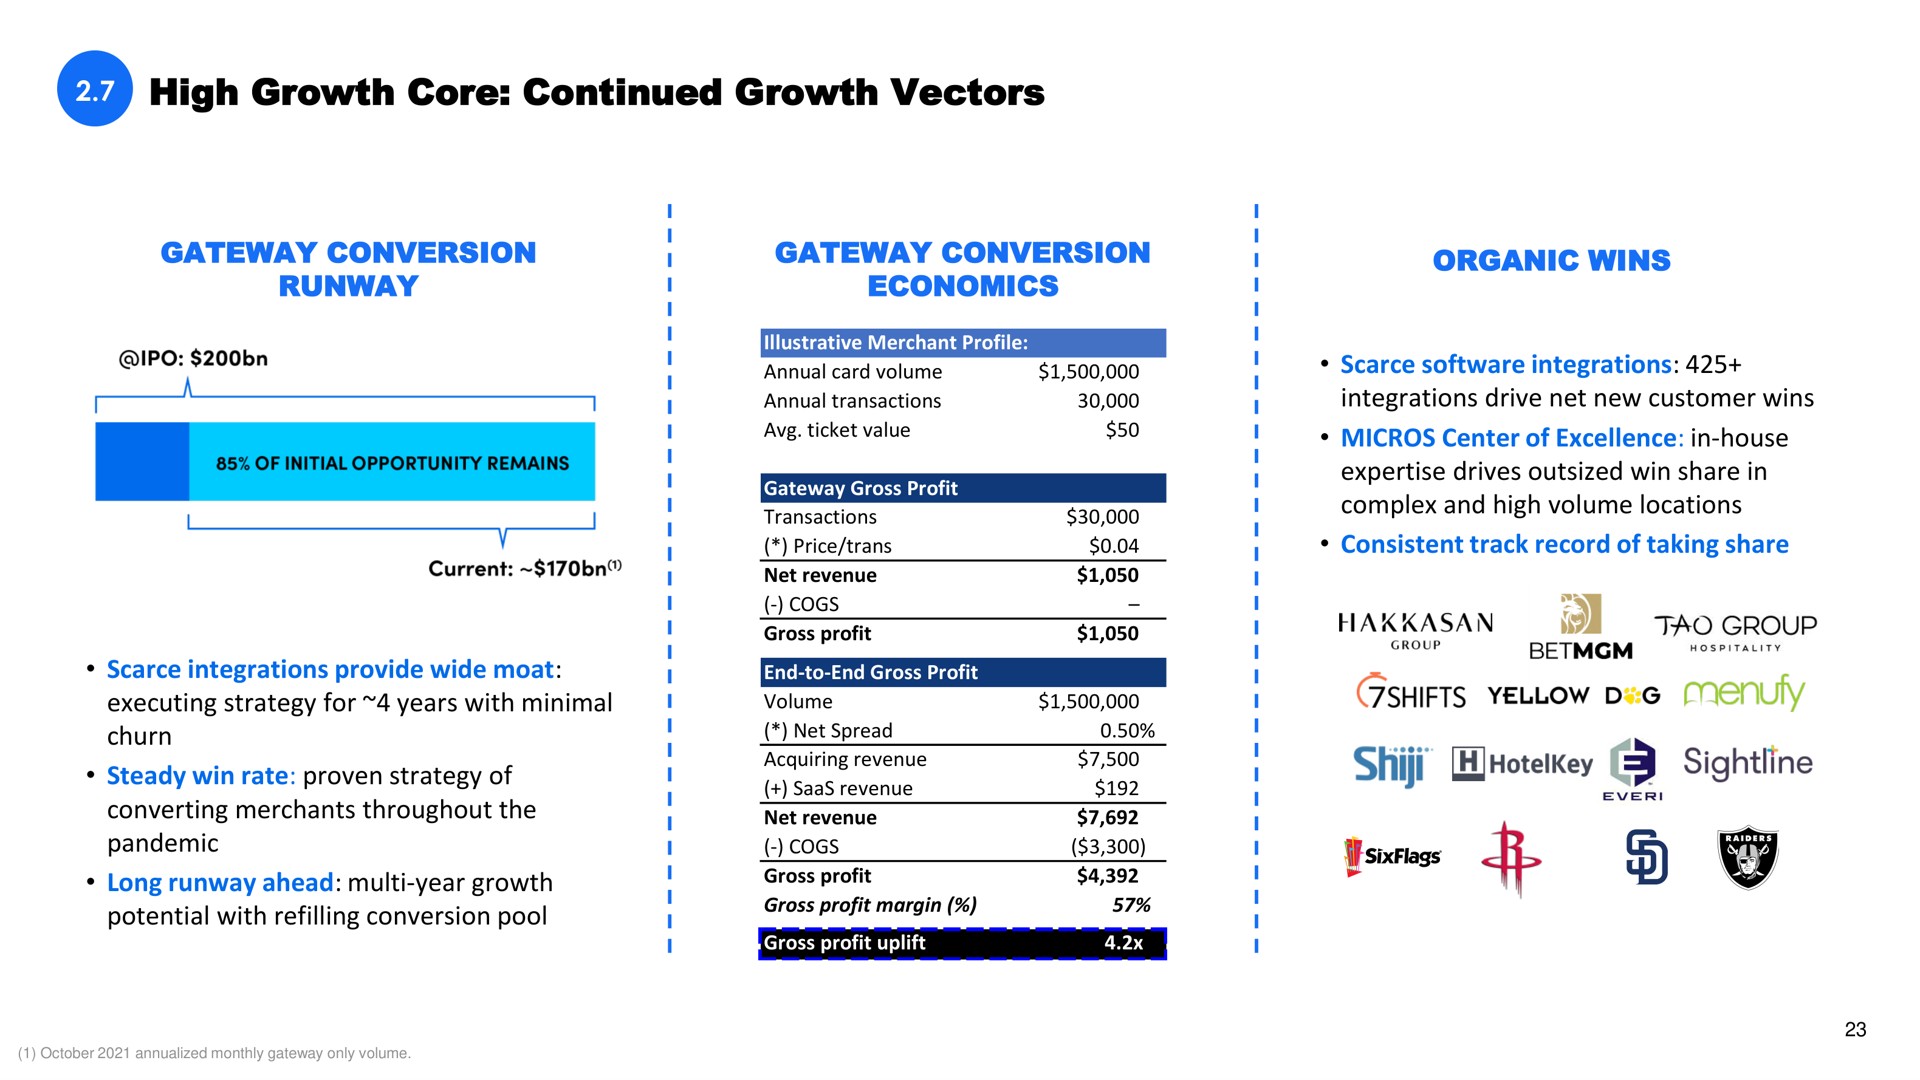 high growth core continued growth vectors gateway conversion runway gateway conversion economics organic wins scarce integrations integrations drive net new customer wins center of excellence in house drives outsized win share in complex and high volume locations consistent track record of taking share scarce integrations provide wide moat executing strategy for years with minimal churn steady win rate proven strategy of converting merchants throughout the pandemic long runway ahead year growth potential with refilling conversion pool a i ticket value gross profit shifts yellow i | Shift4